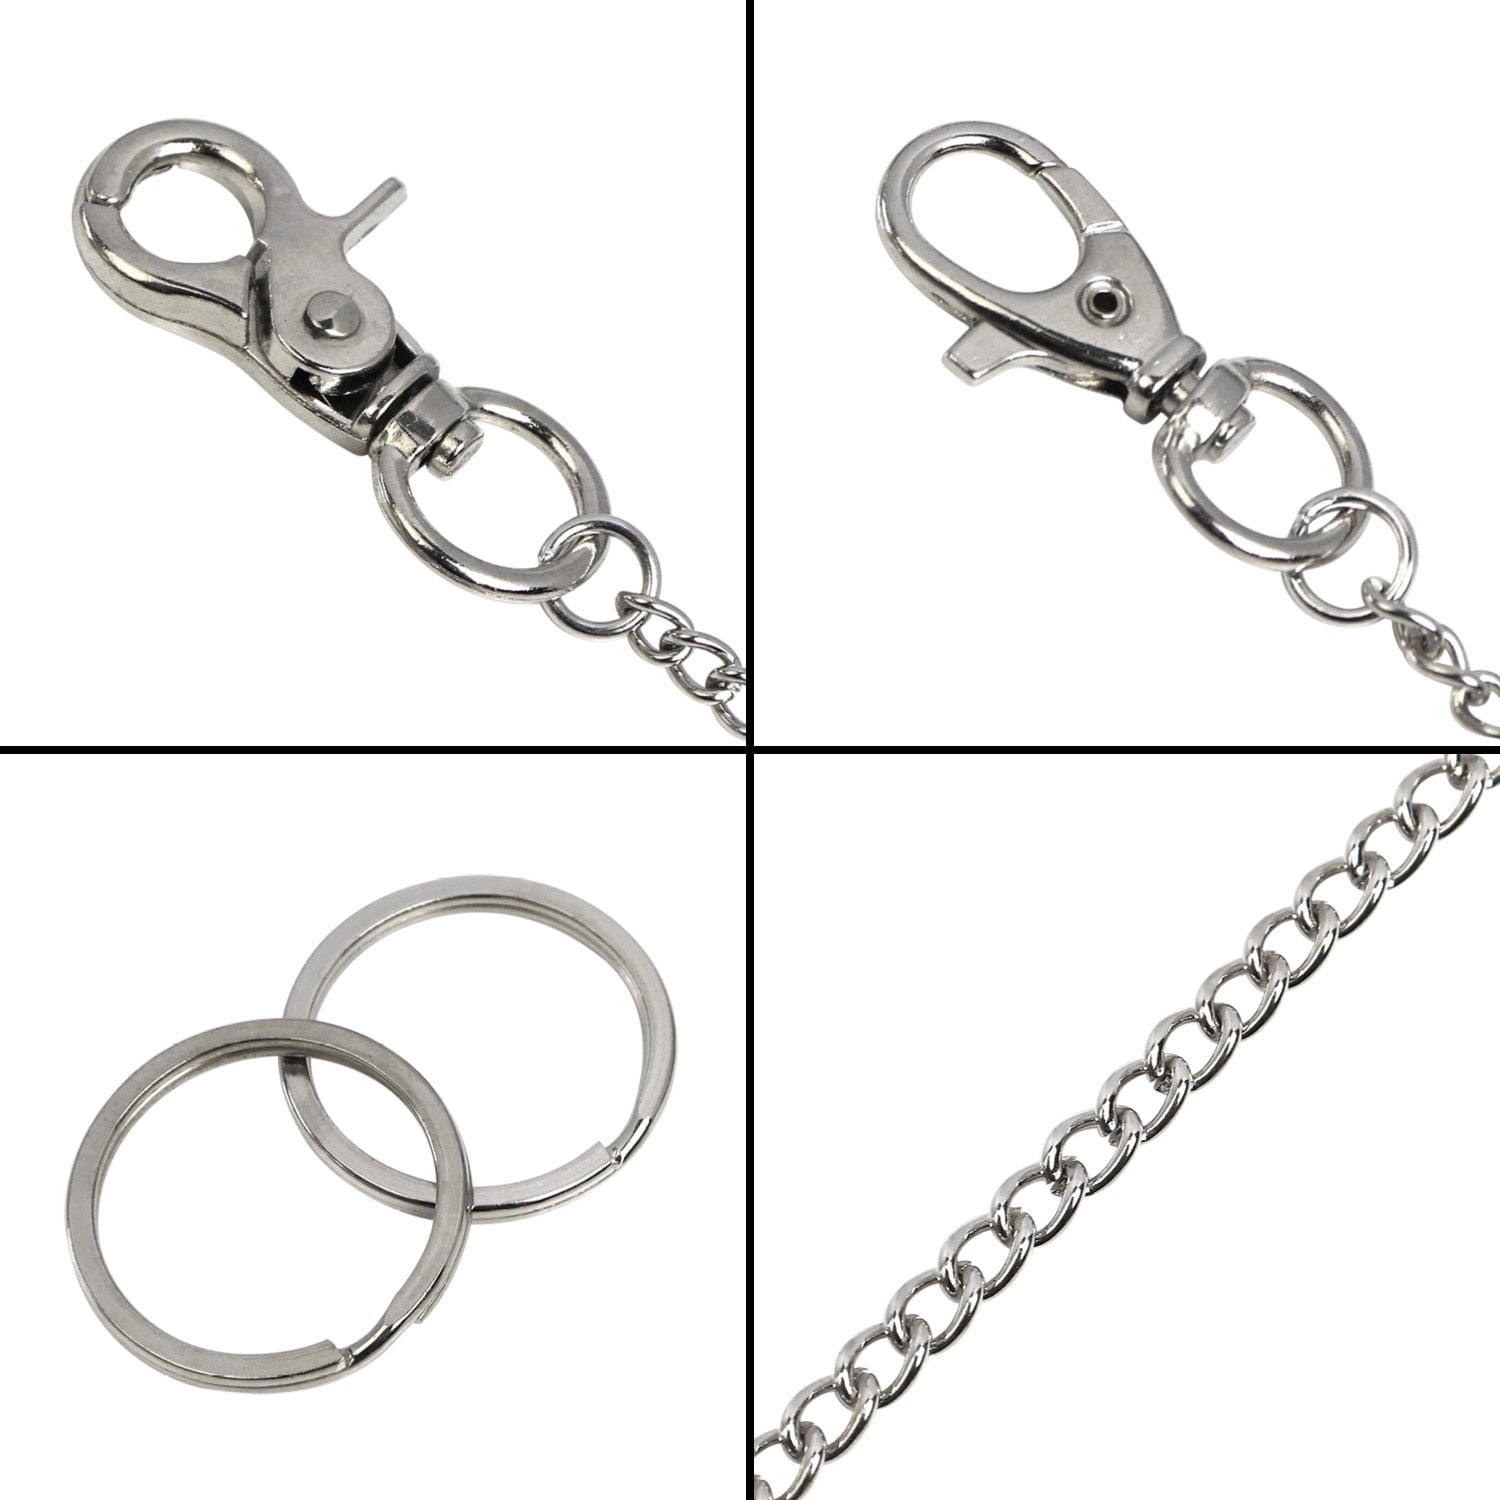 Mautto Heavy-Duty Wallet Chain / Key Tether - Standard & Long Lengths Standard - 18 Inches / Silver-Tone